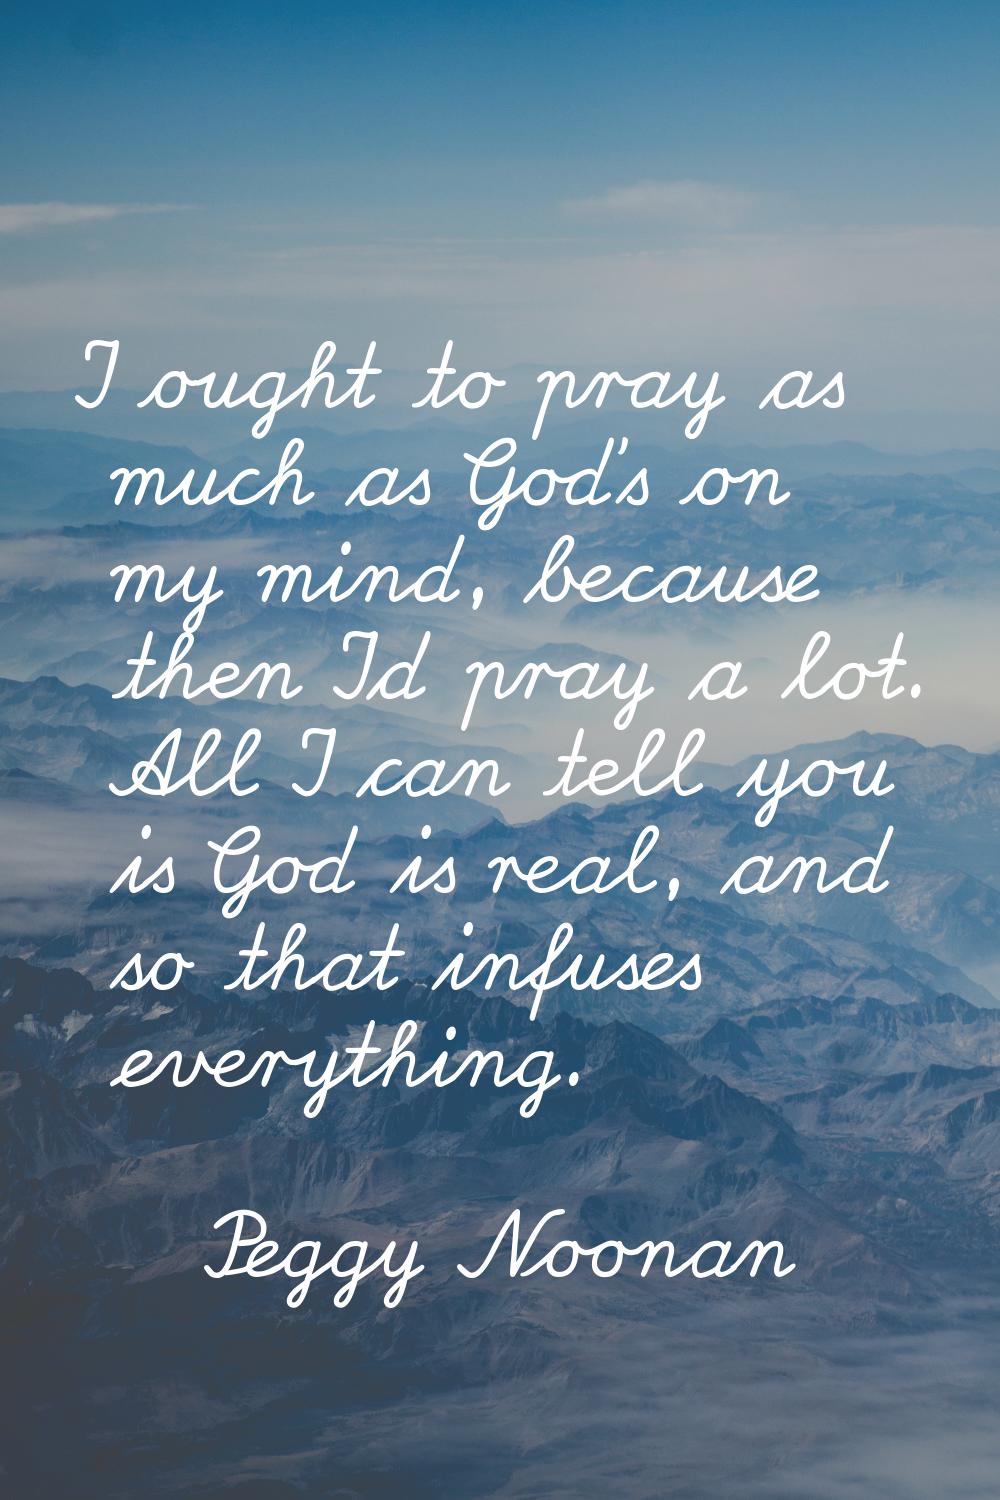 I ought to pray as much as God's on my mind, because then I'd pray a lot. All I can tell you is God